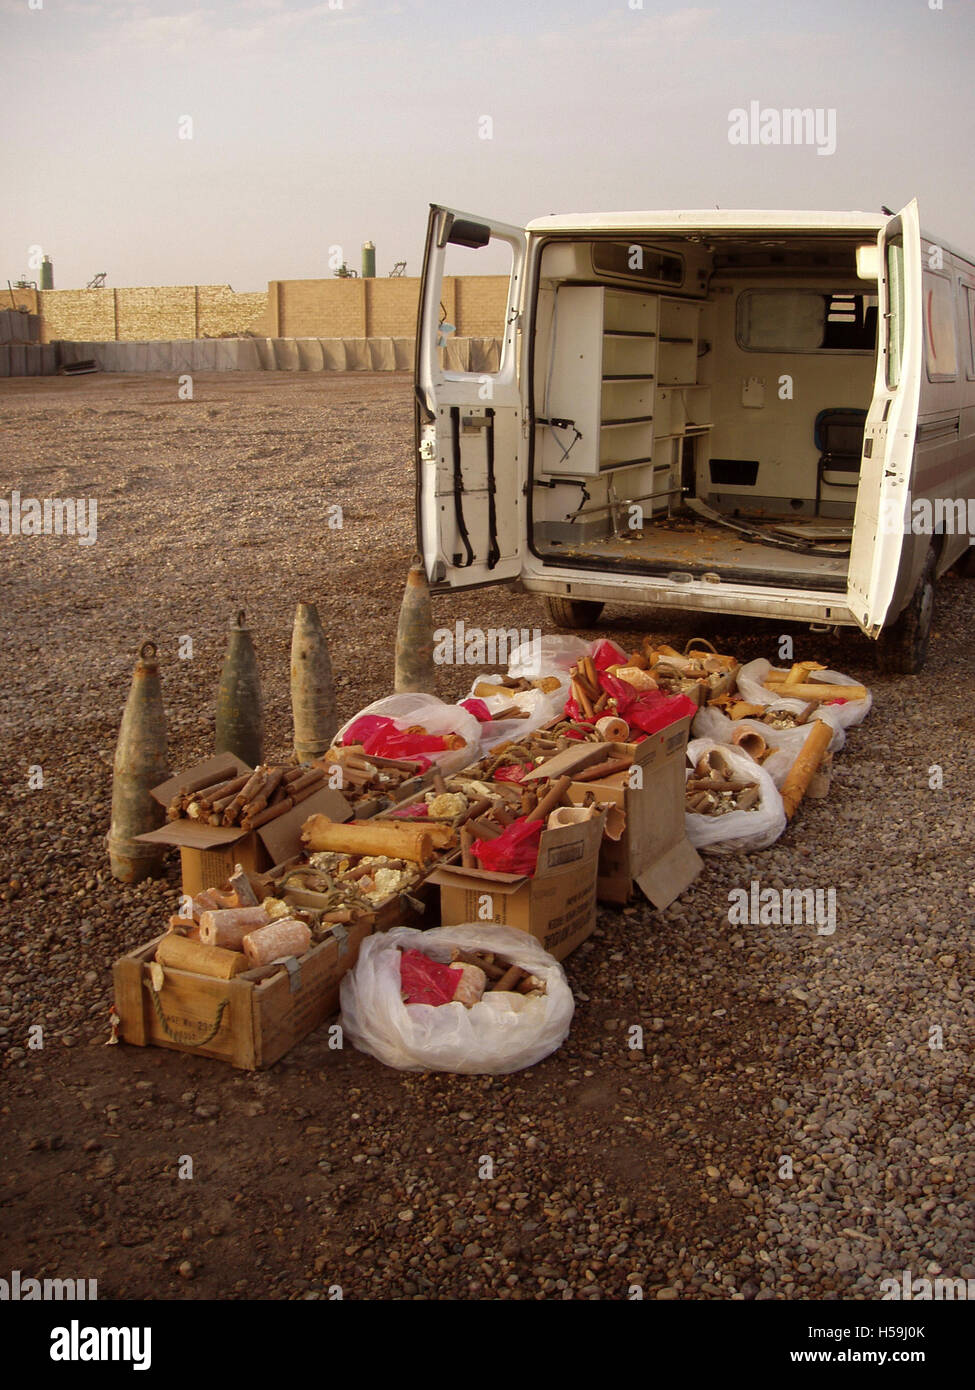 11th November 2003 An arms cache put on display by the U.S. Army inside FOB (Forward Operating Base) Falcon, south of Baghdad. Stock Photo